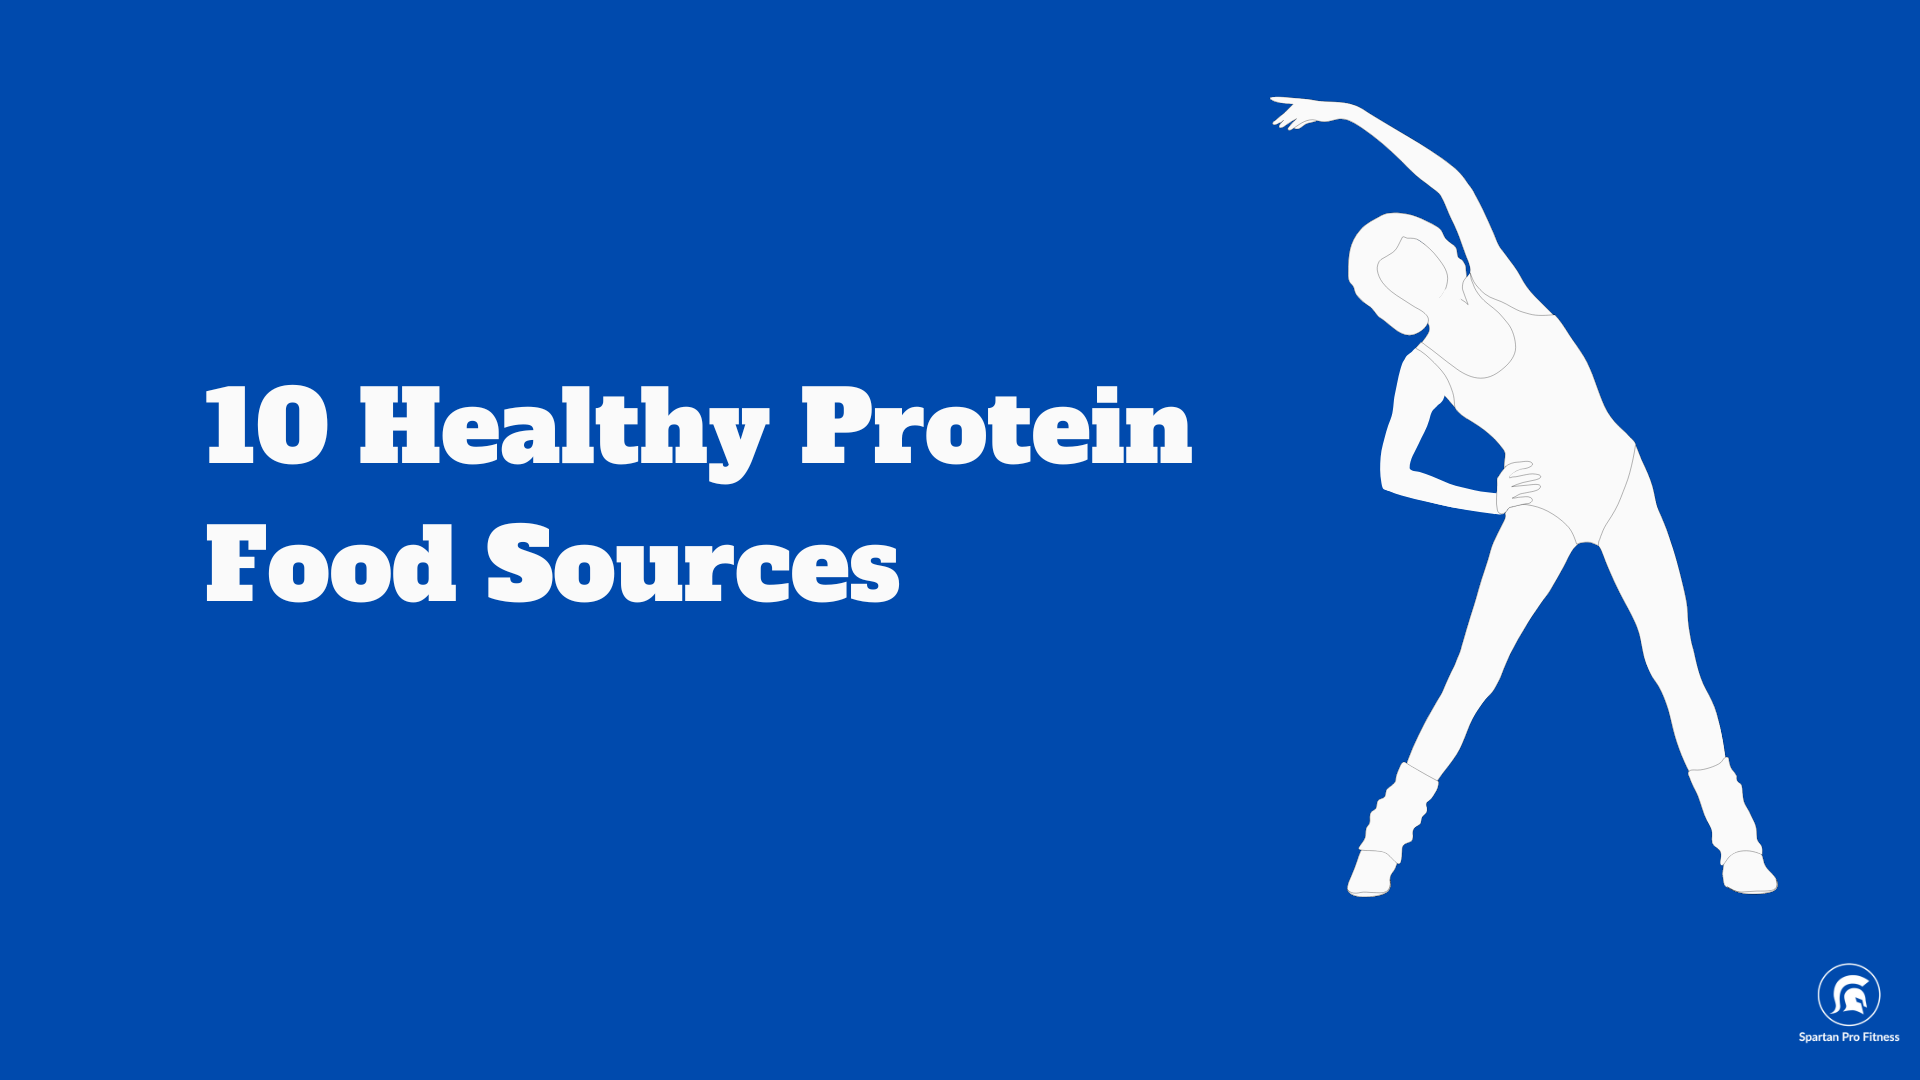 10 Healthy Protein Food Sources